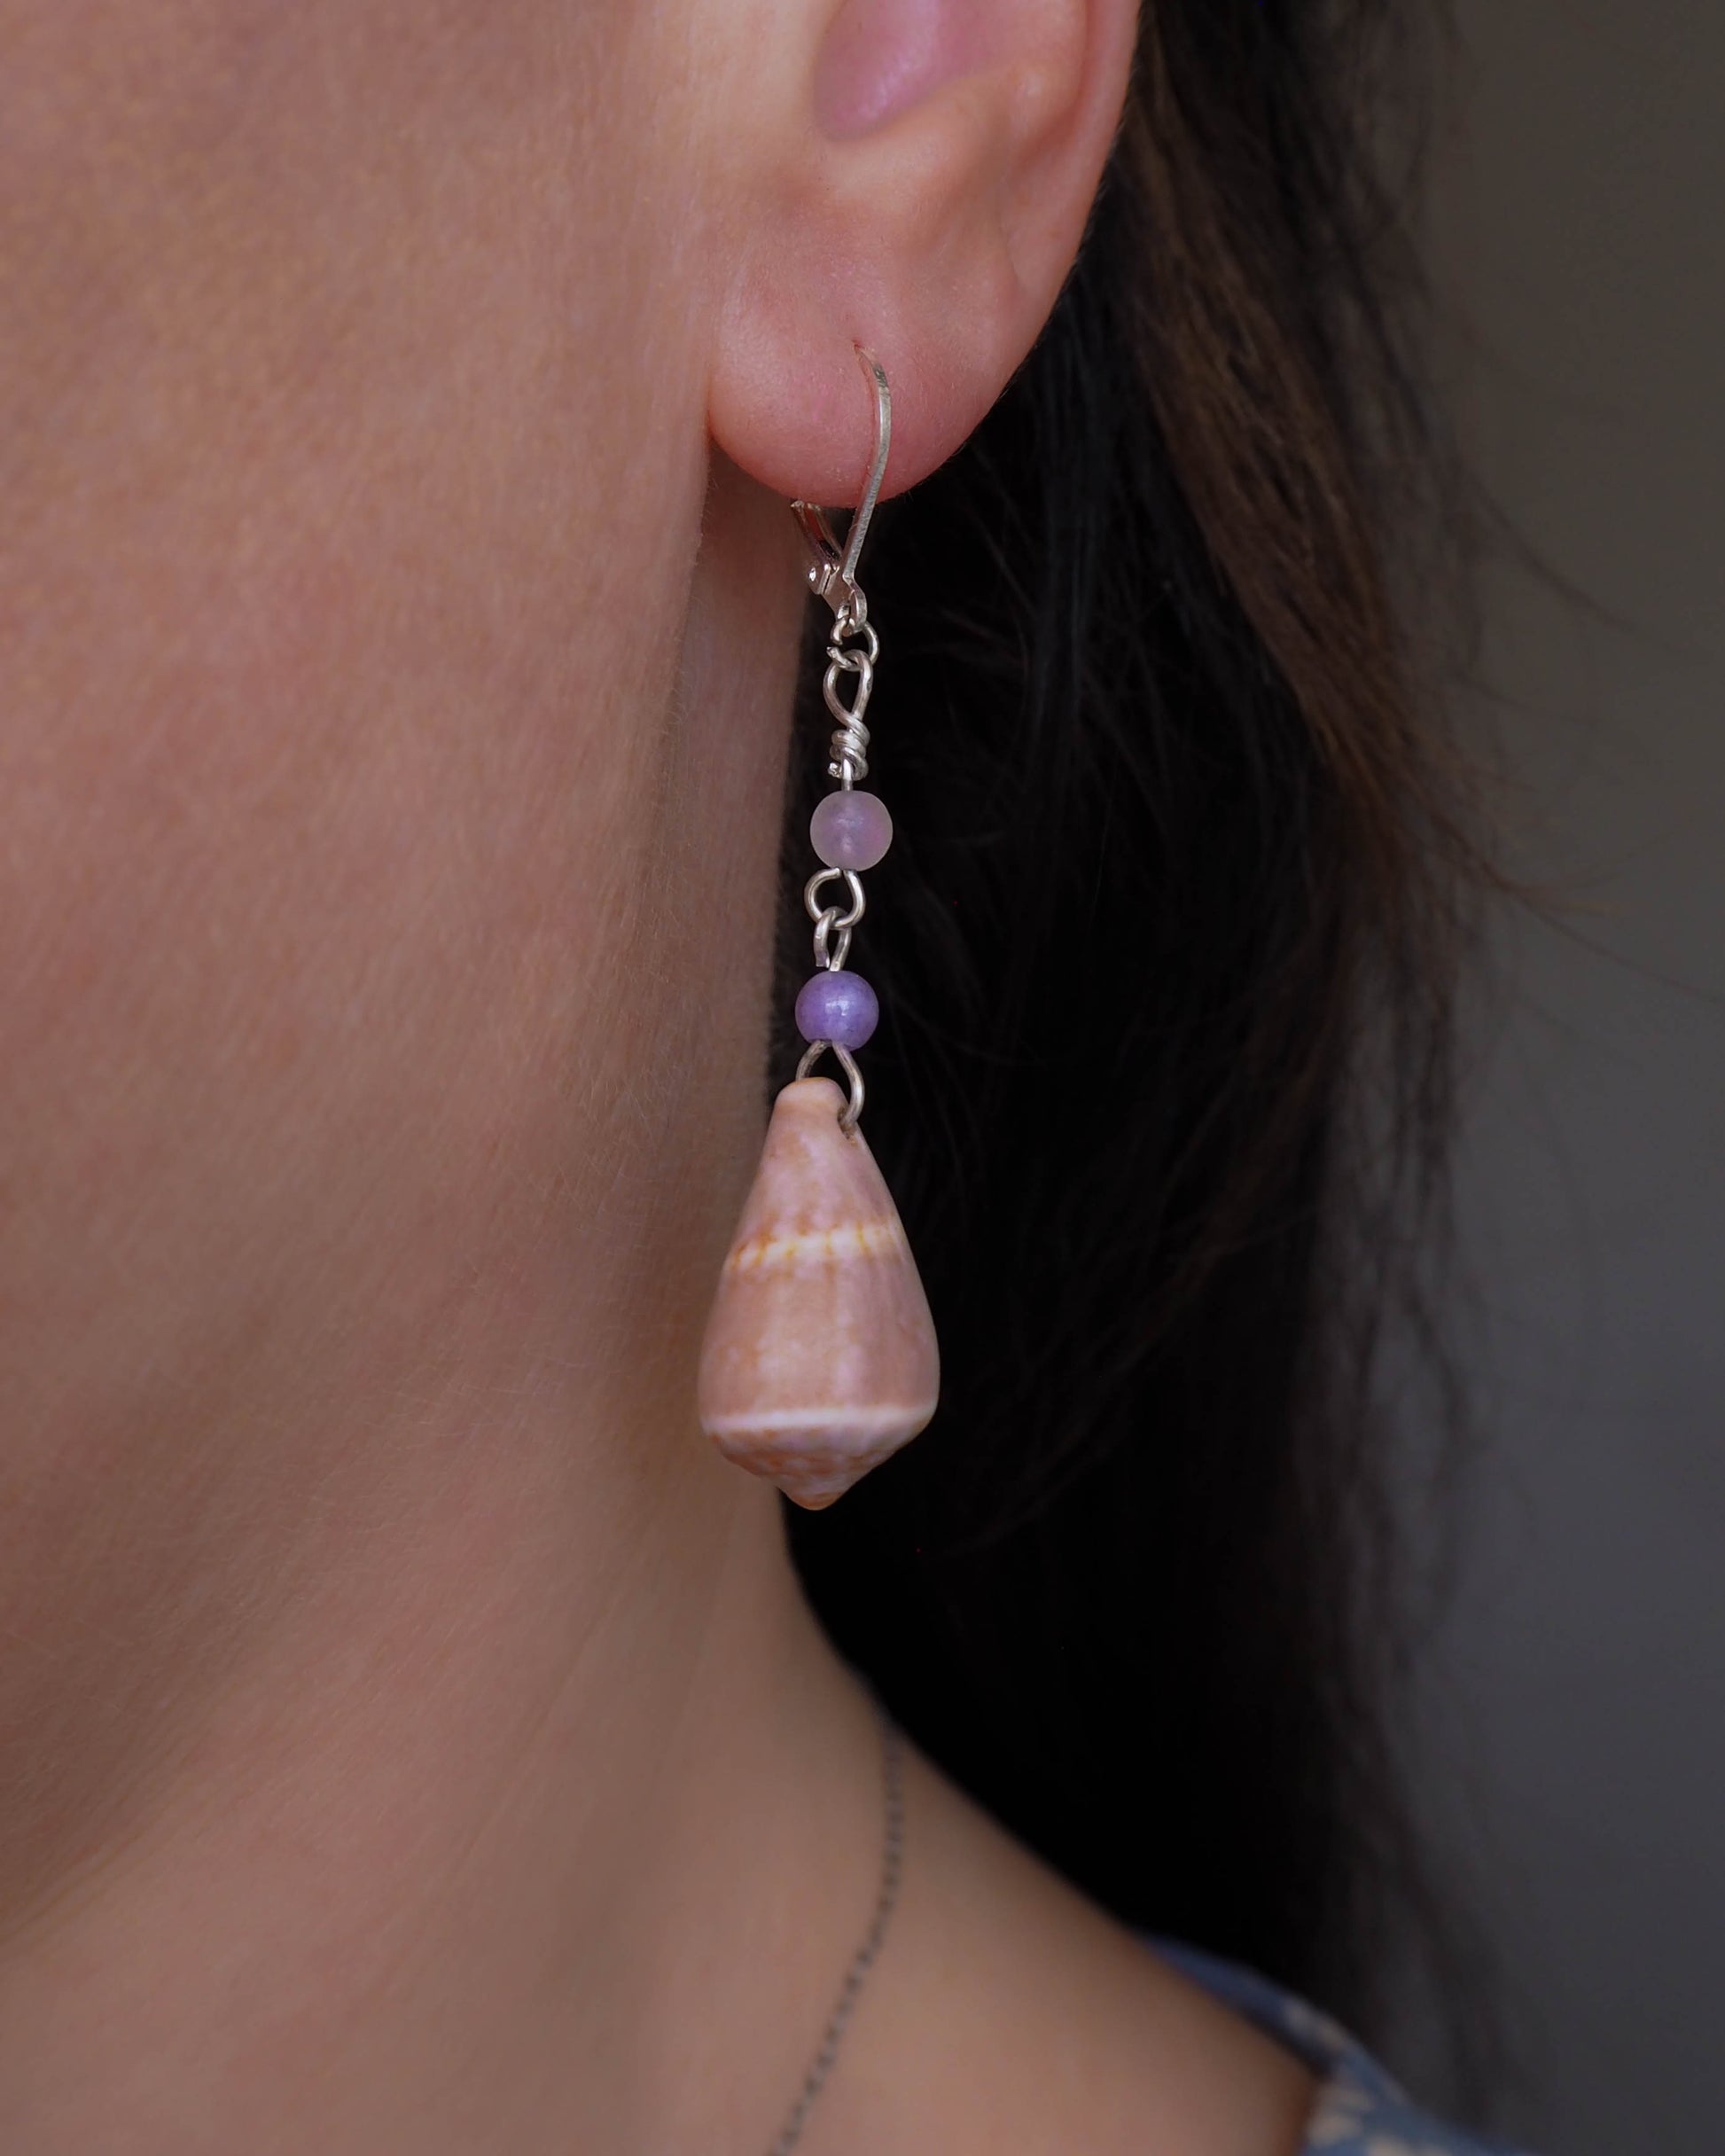 Boho Beach Style - Portuguese Cone Shell Earrings with Natural Gemstones made by Sea by Lou 